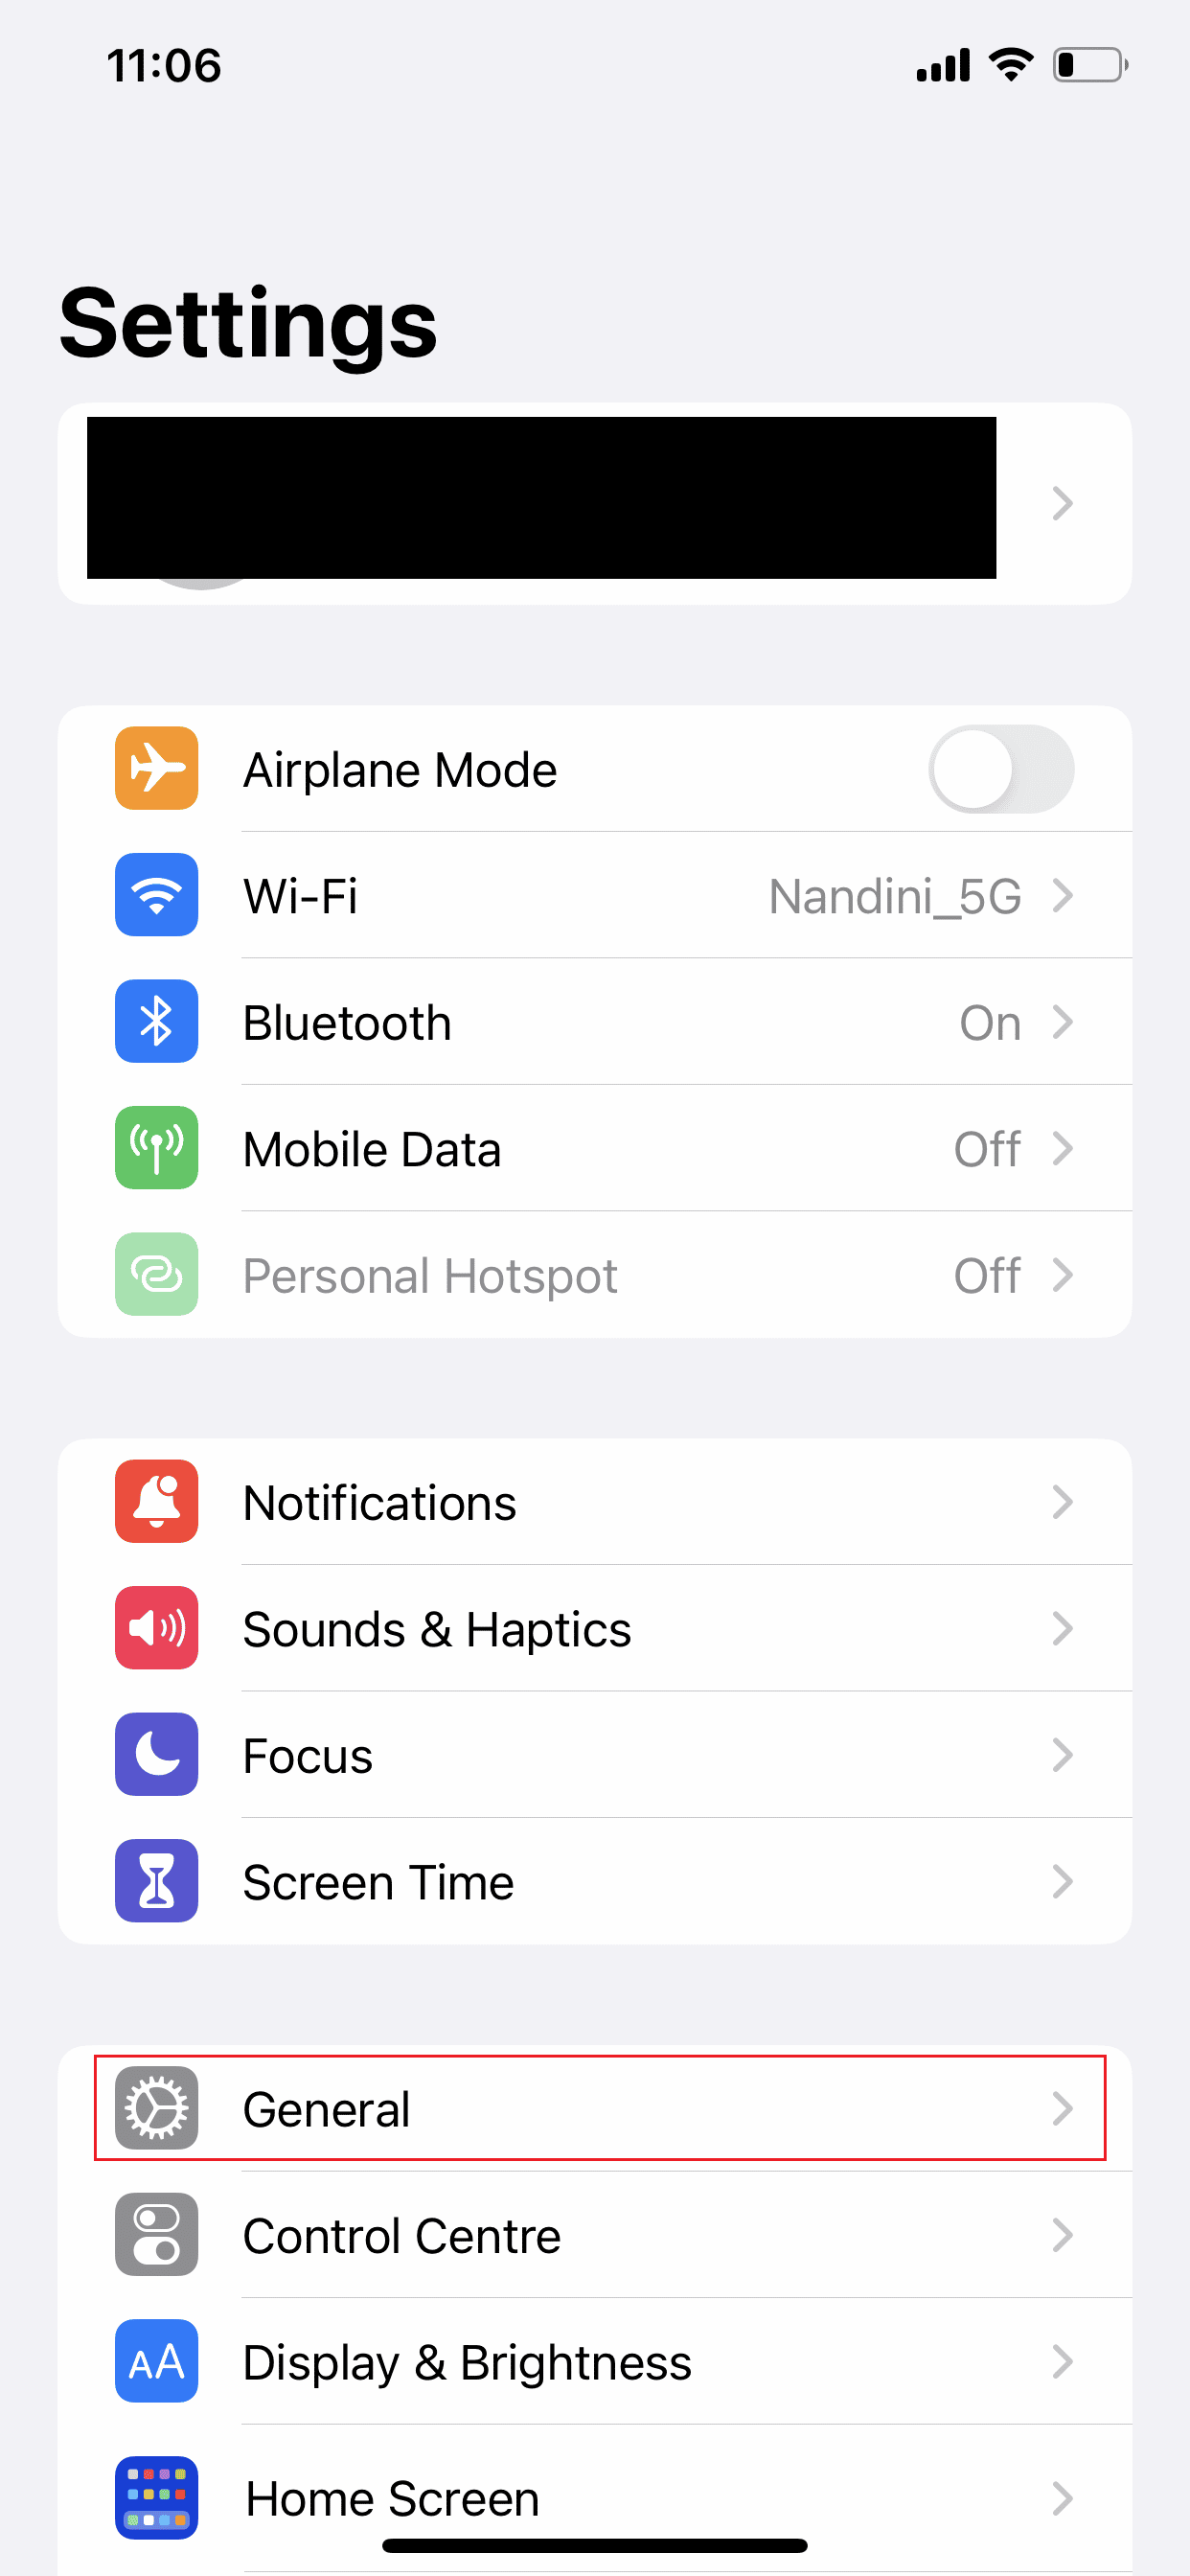 tap on General from the menu | fix iPhone screen flickering and unresponsive